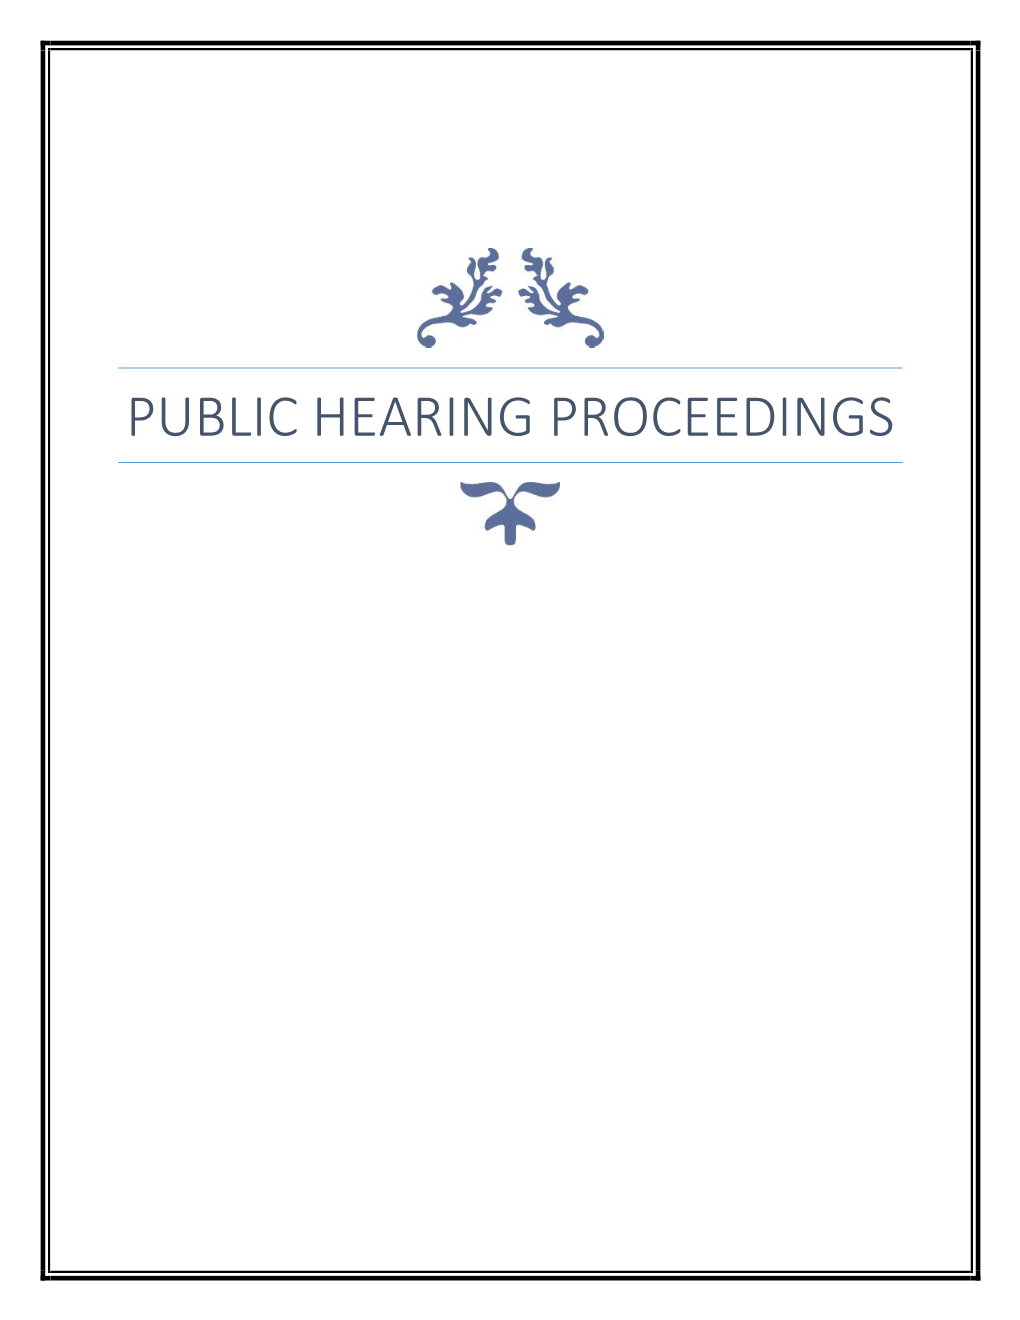 PUBLIC HEARING PROCEEDINGS Minutes of the Environmental Public Hearing of M/S